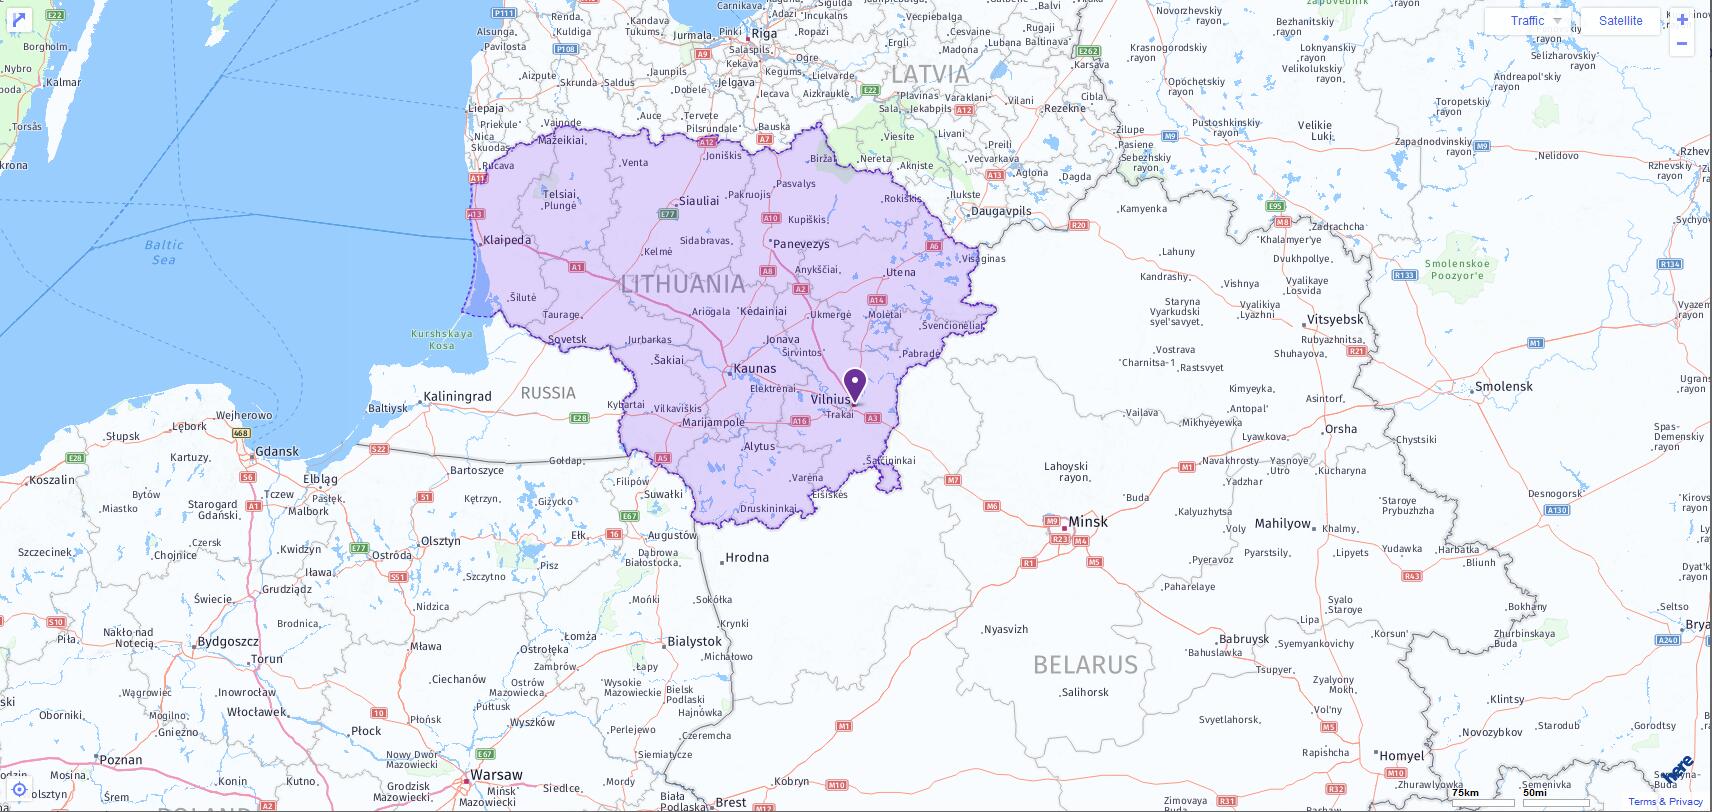 ACT Test Centers and Dates in Lithuania